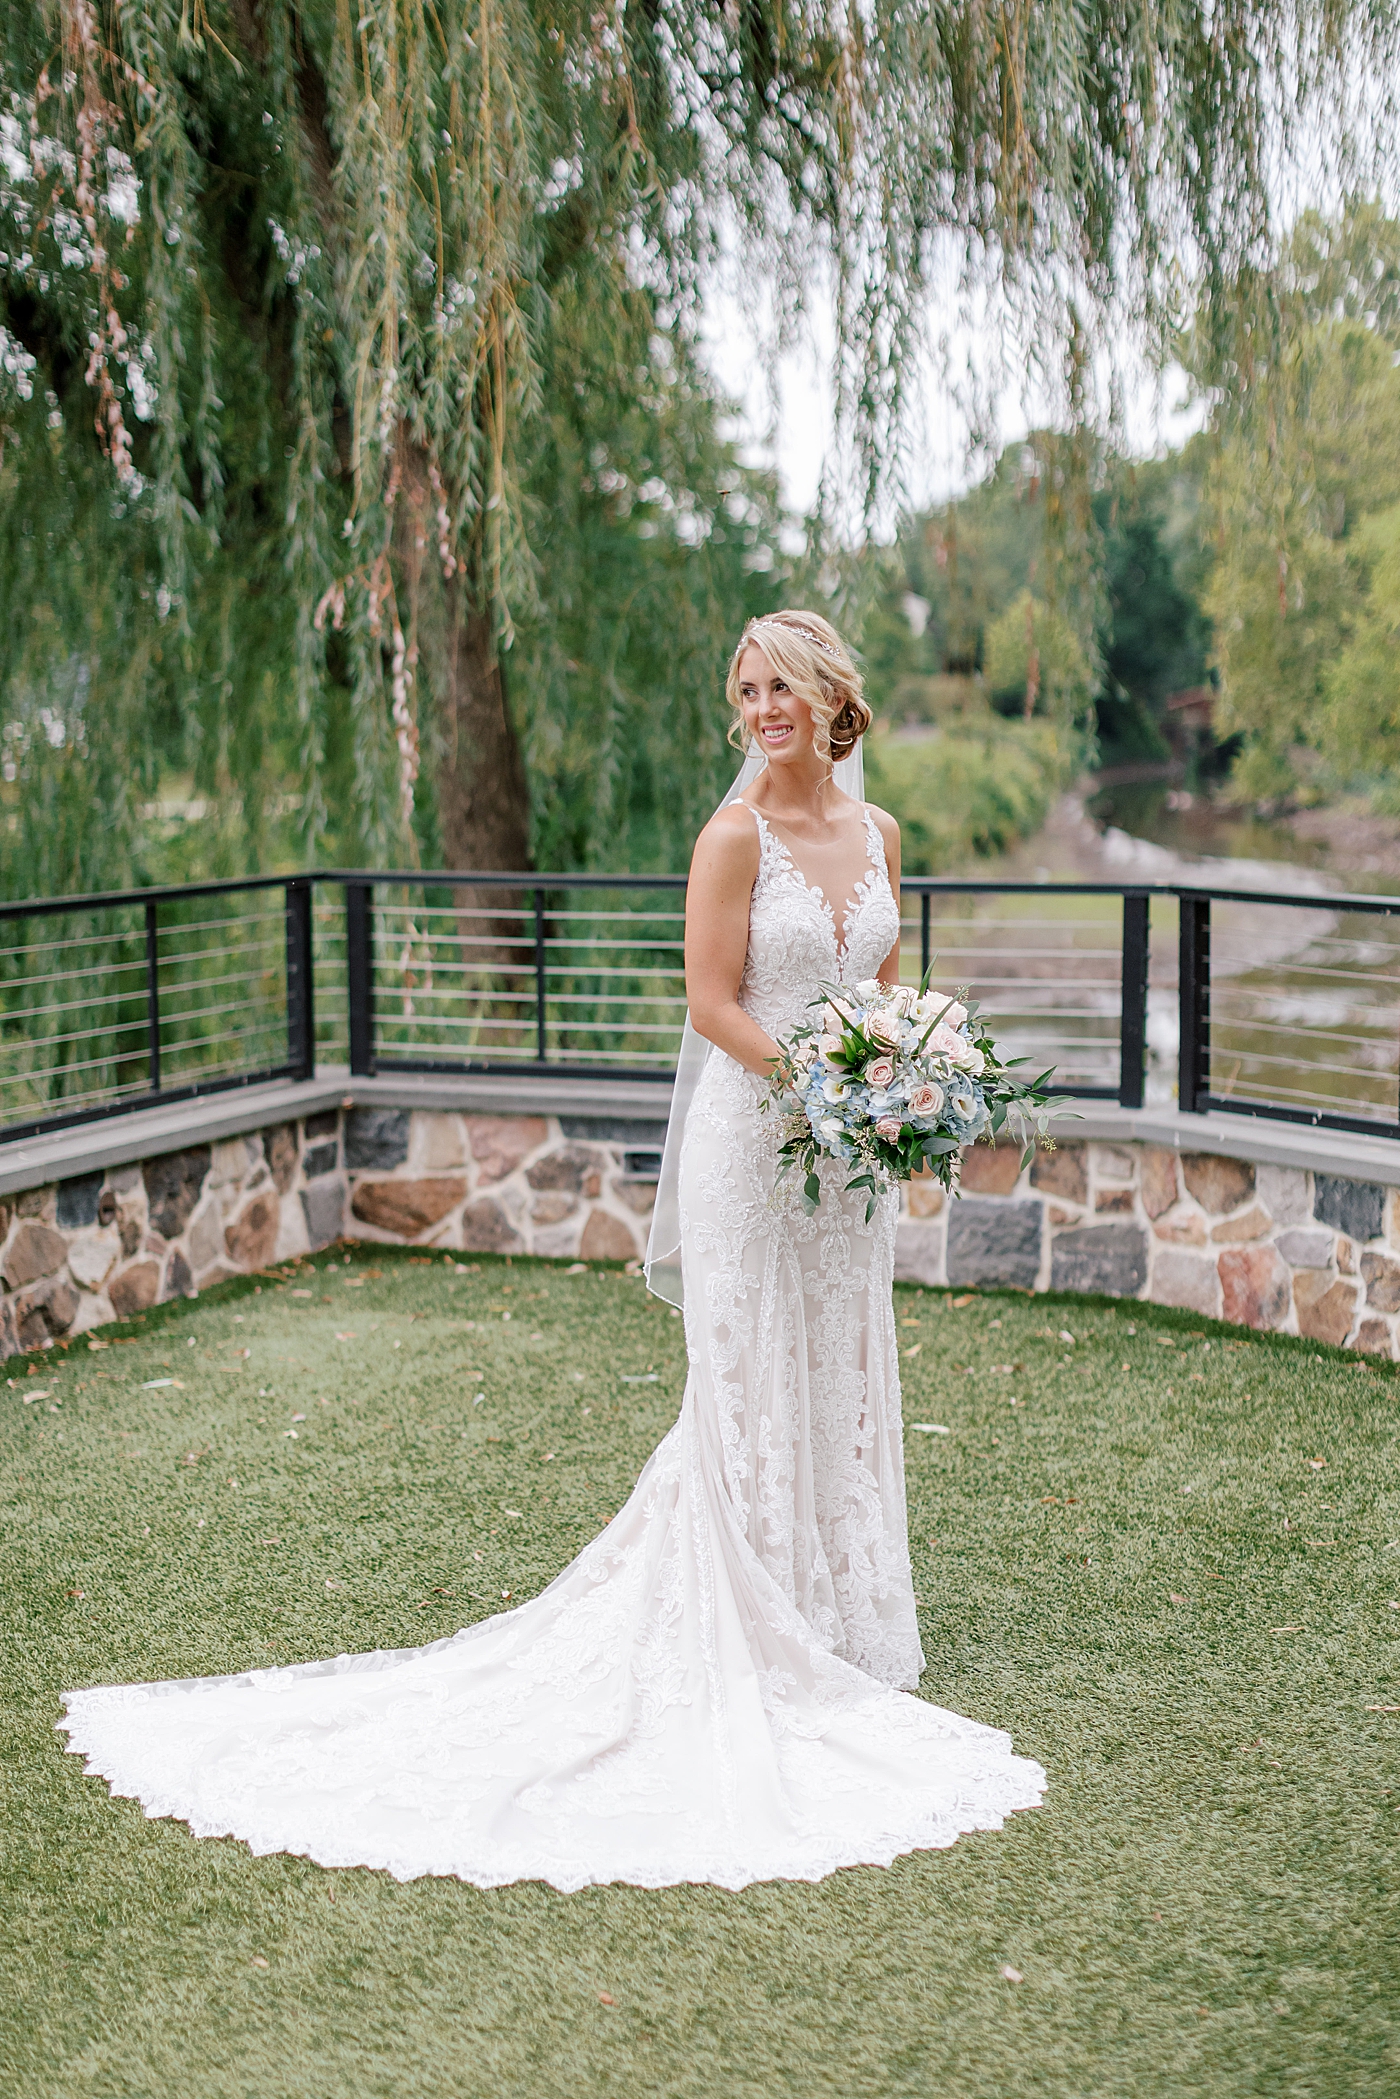 Bride holding her bouquet Image by Hope Helmuth Photography